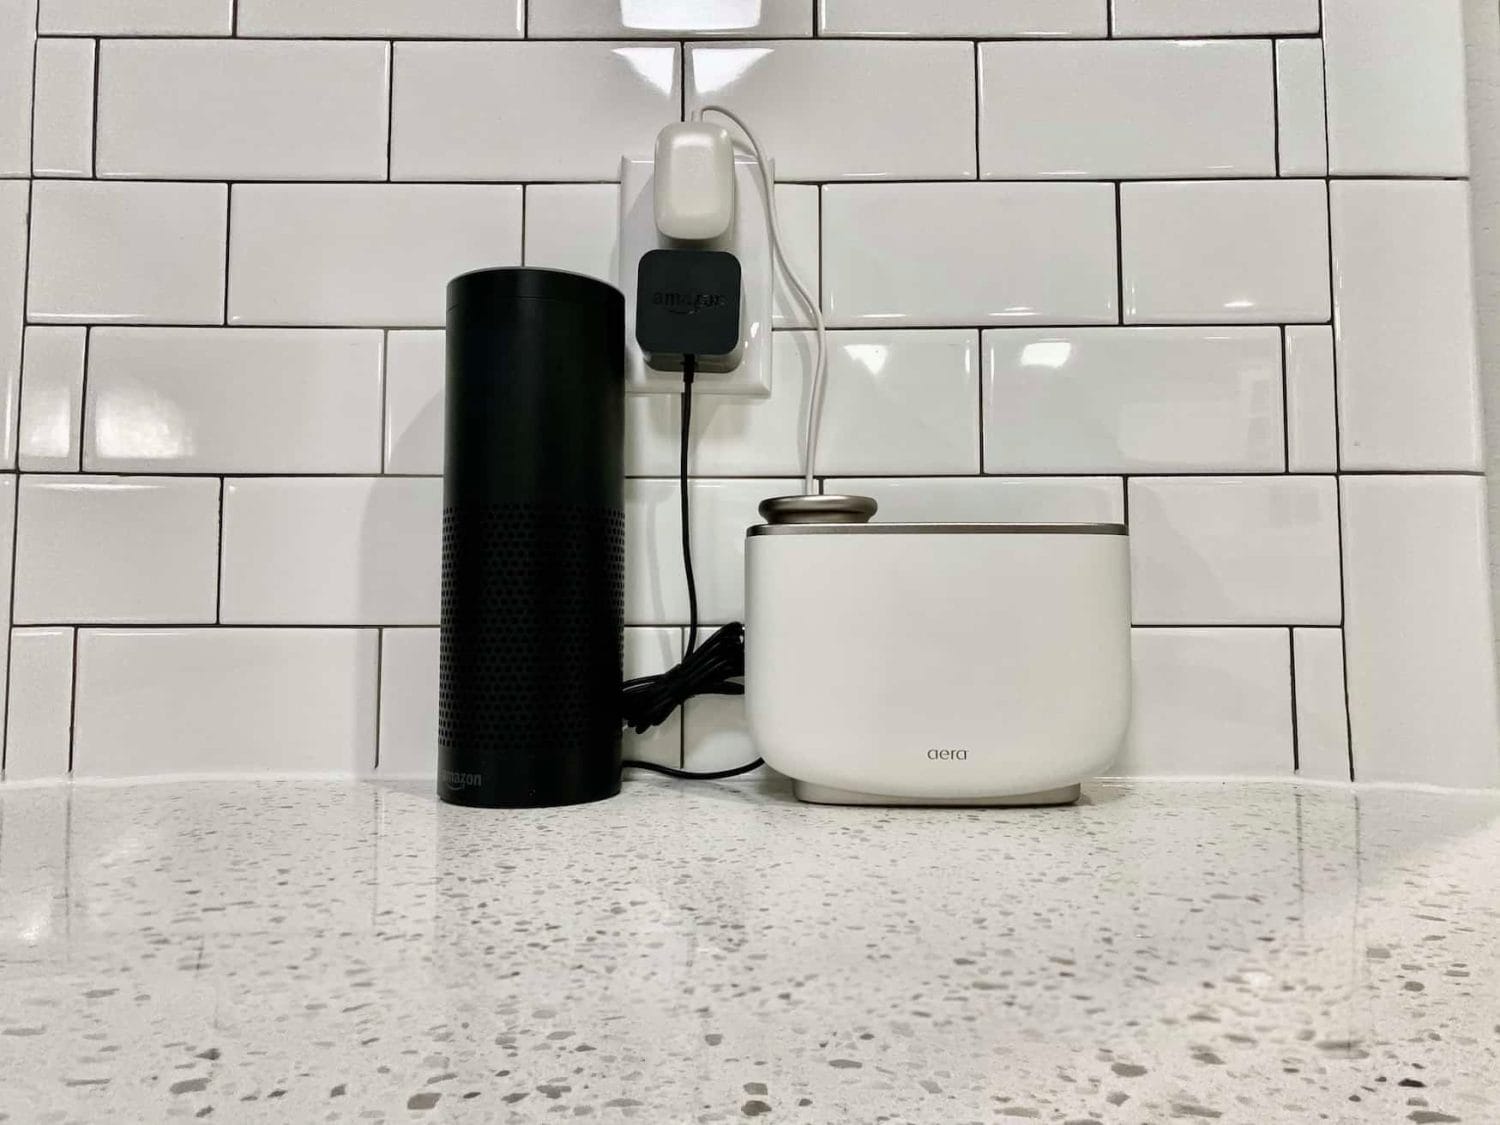 Aera Smart Diffuser Review: Here's what it looks like at home